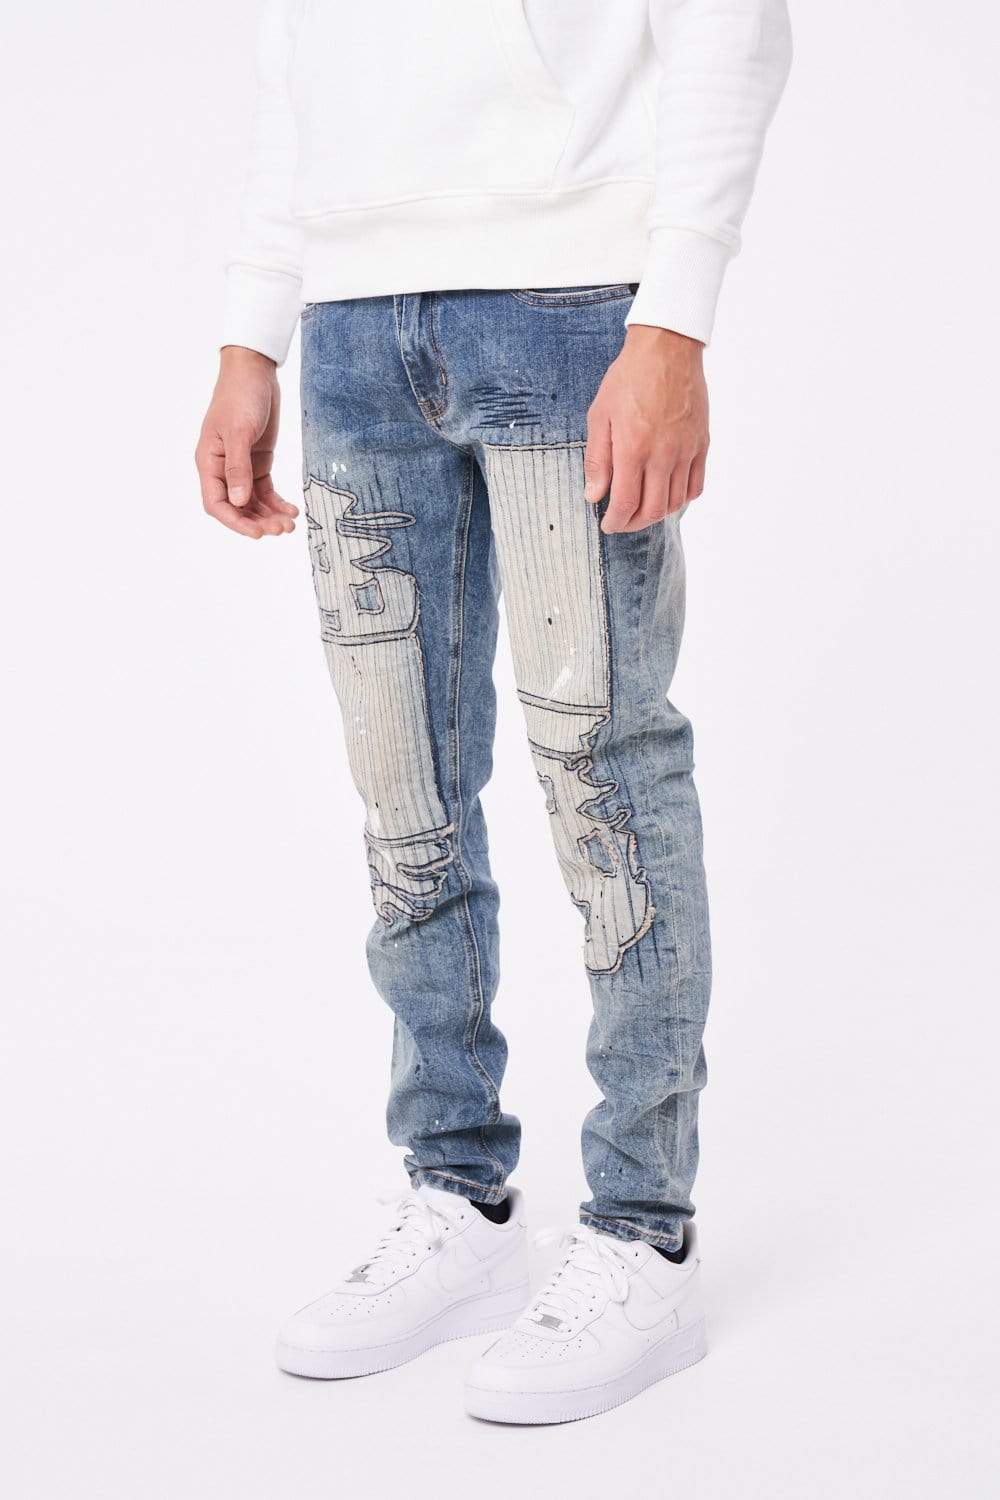 Amicci Premium Quality Men's Ripped Denim Jeans - Italian Styling – Page 4